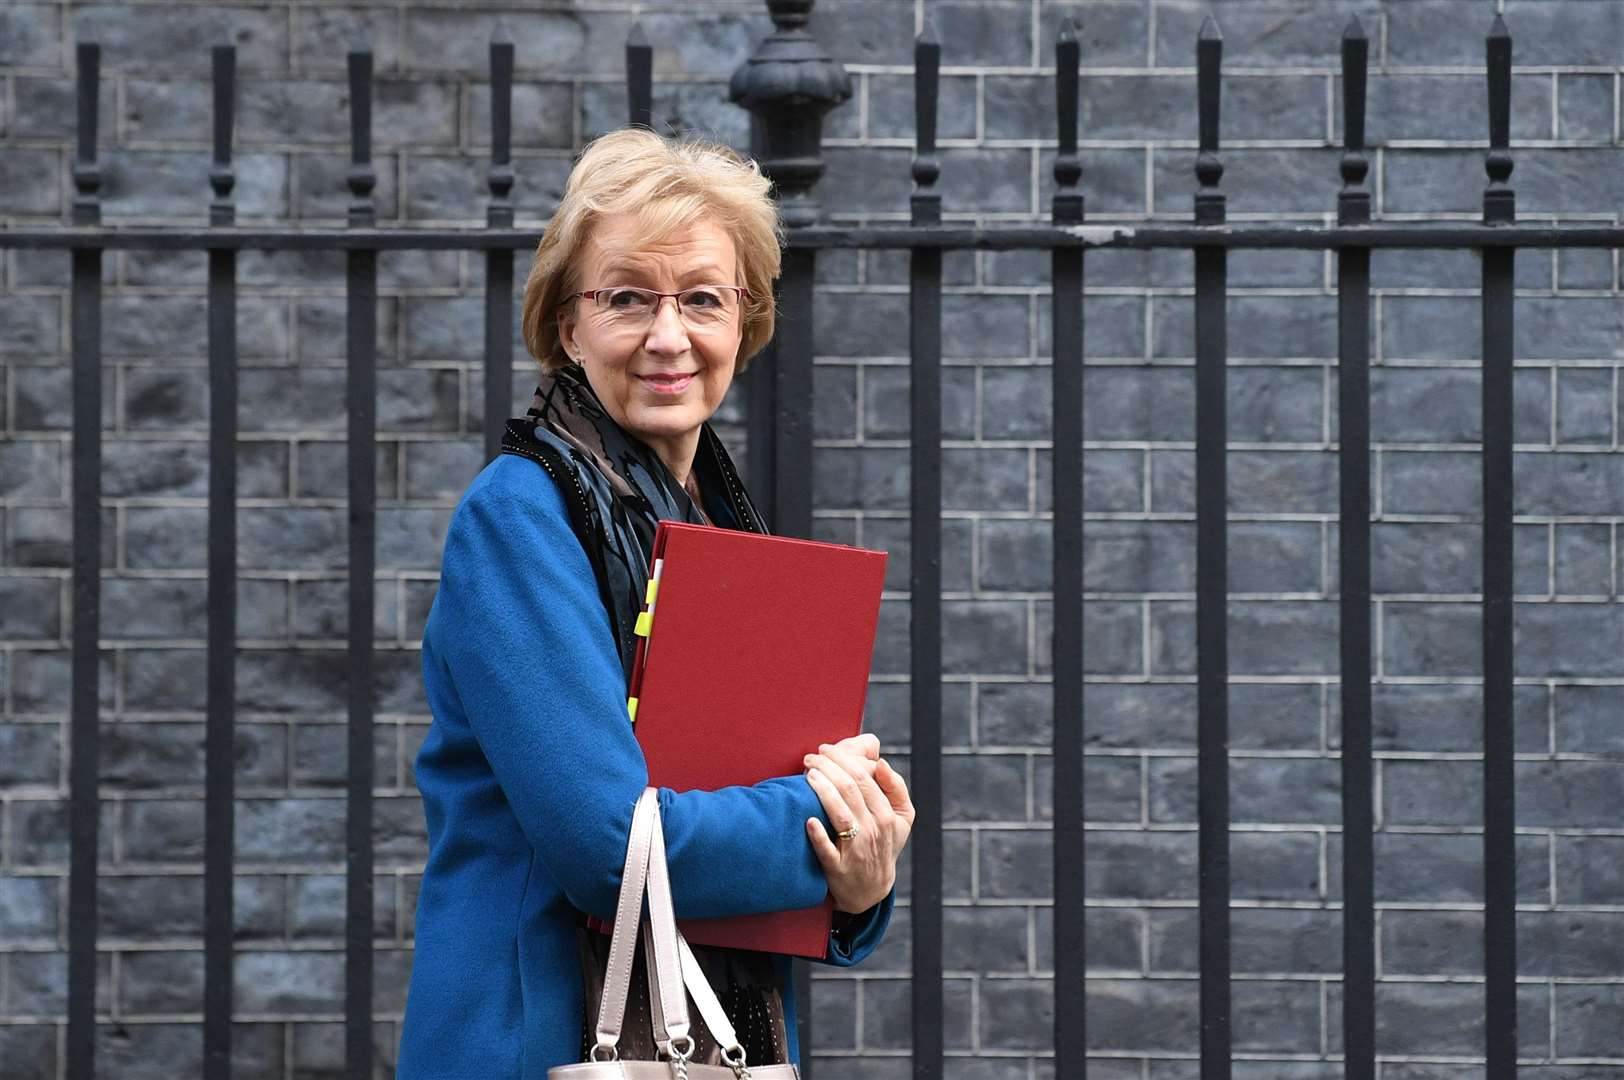 Health minister Andrea Leadsom said HIV testing has made ‘excellent progress’ (Stefan Rousseau/PA Images)